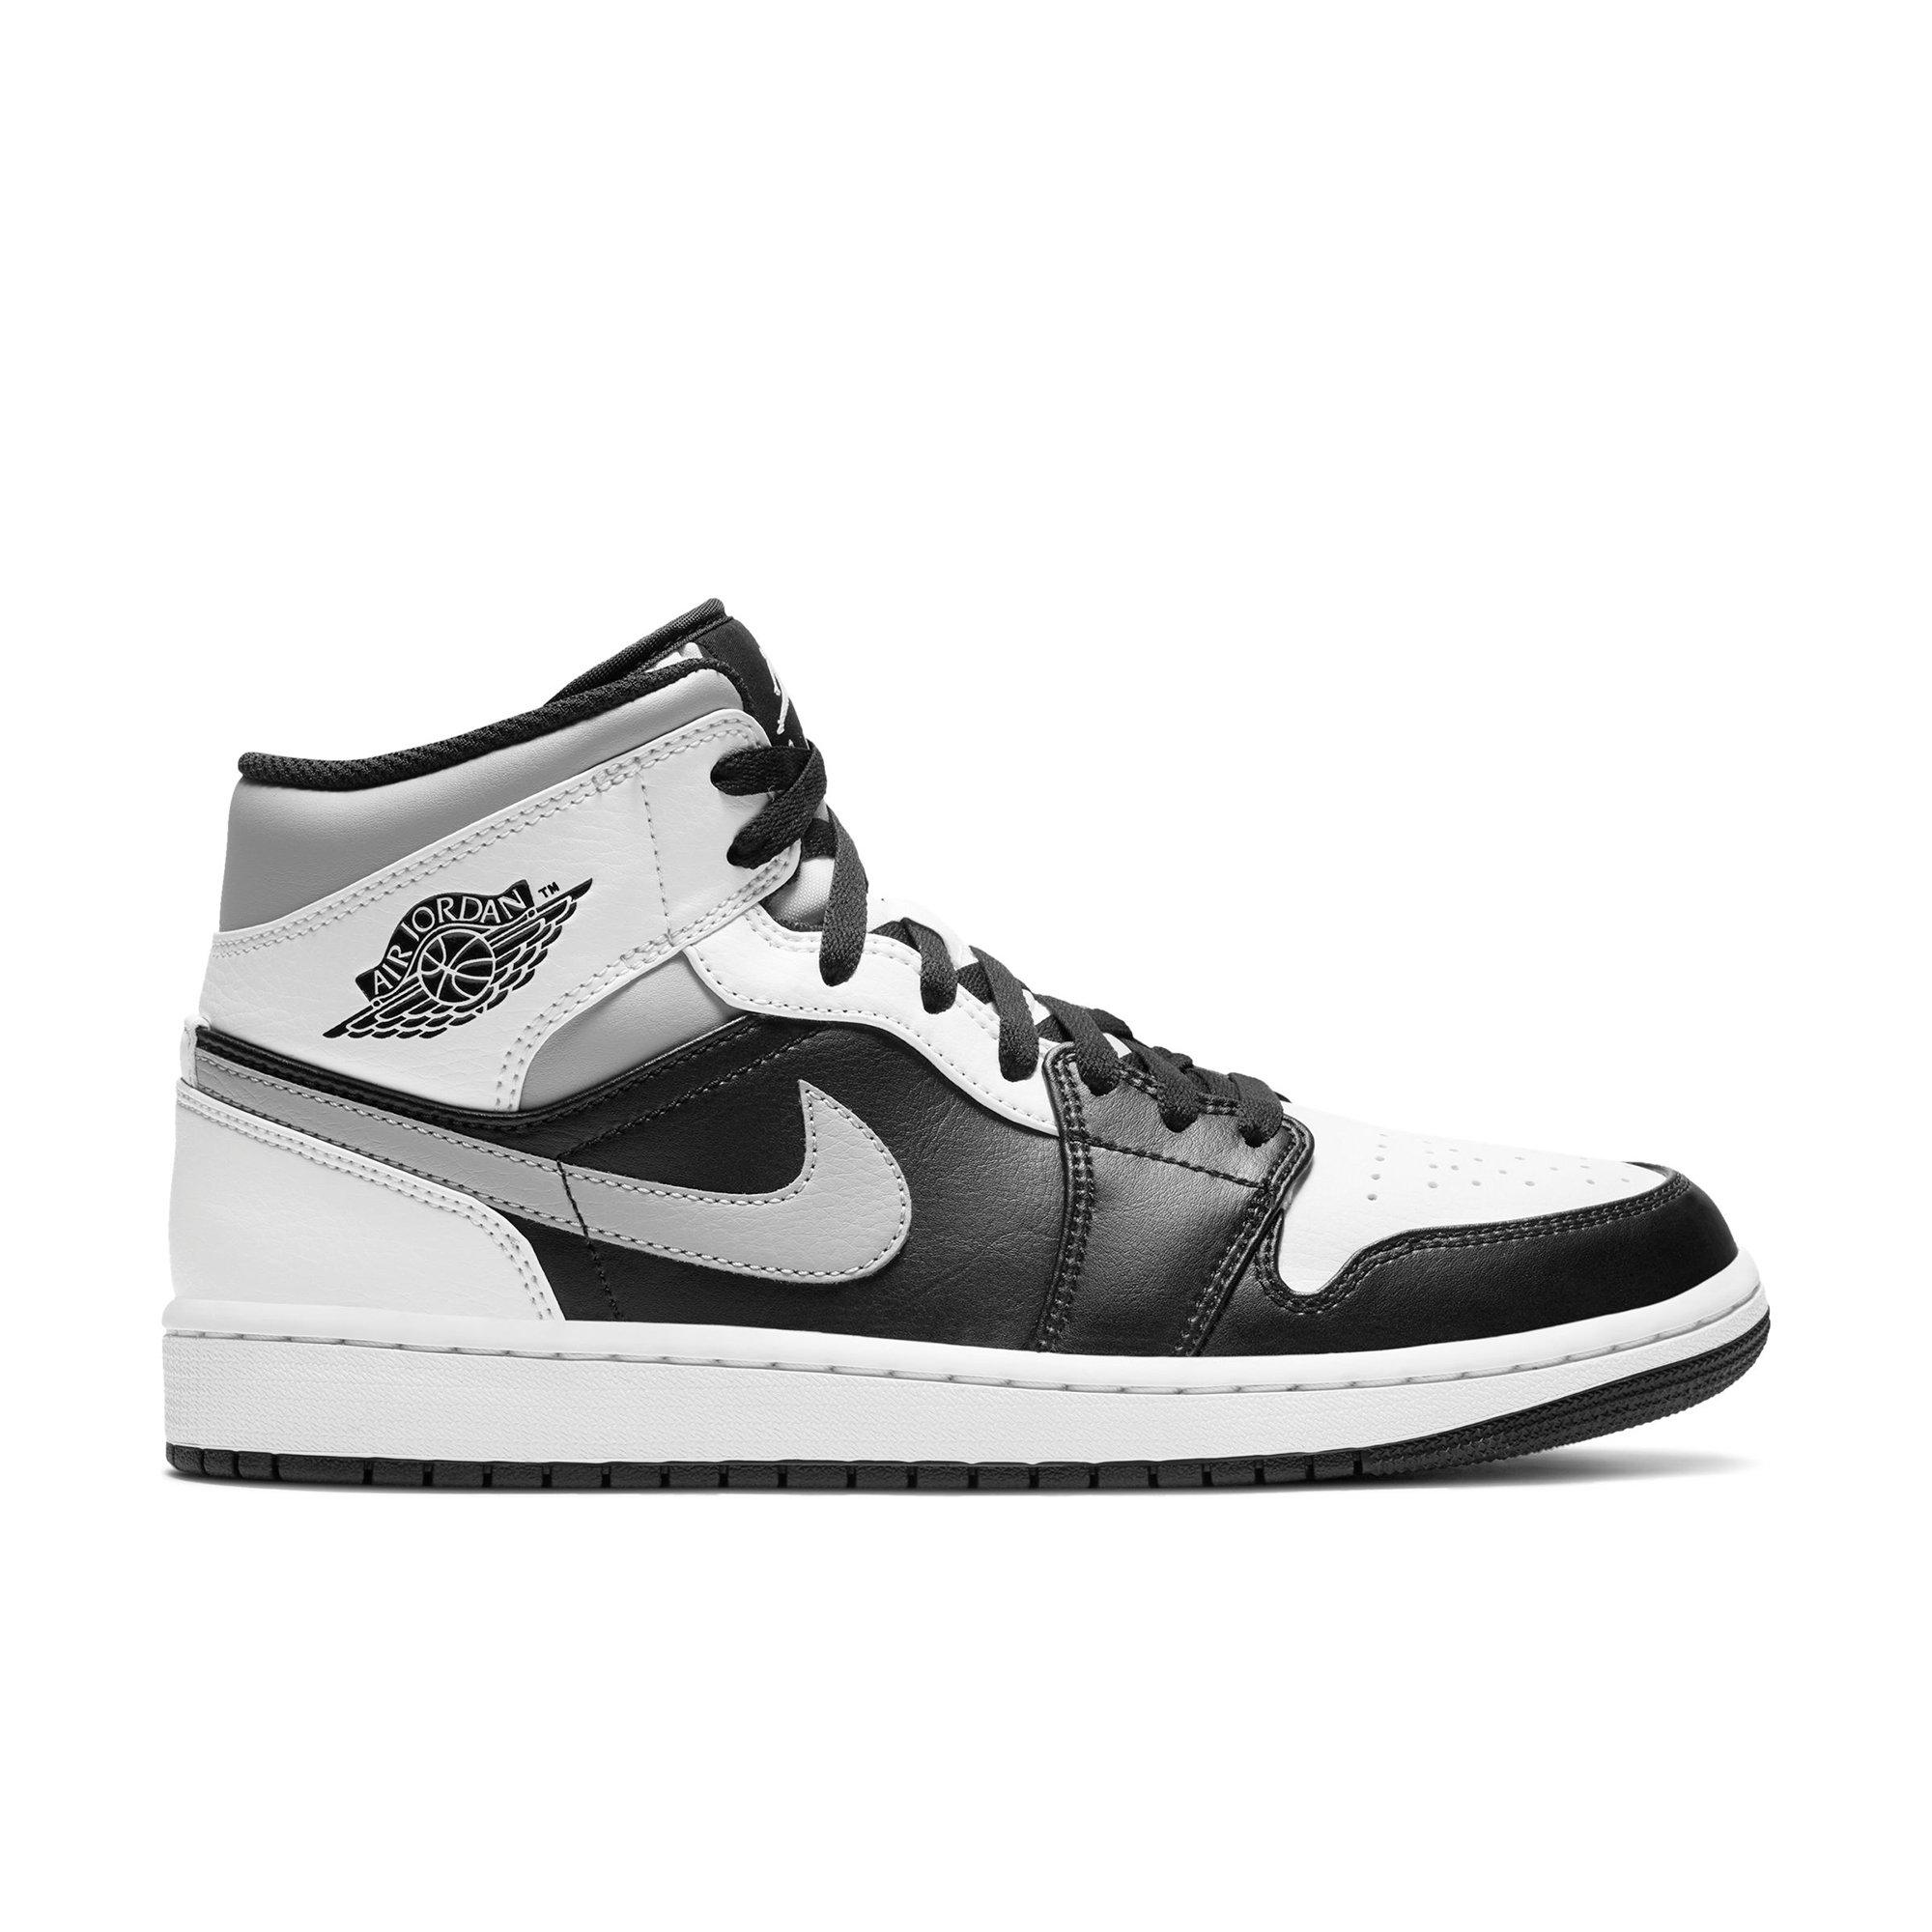 air jordan 1 mid,Save up to 16%,www.ilcascinone.com